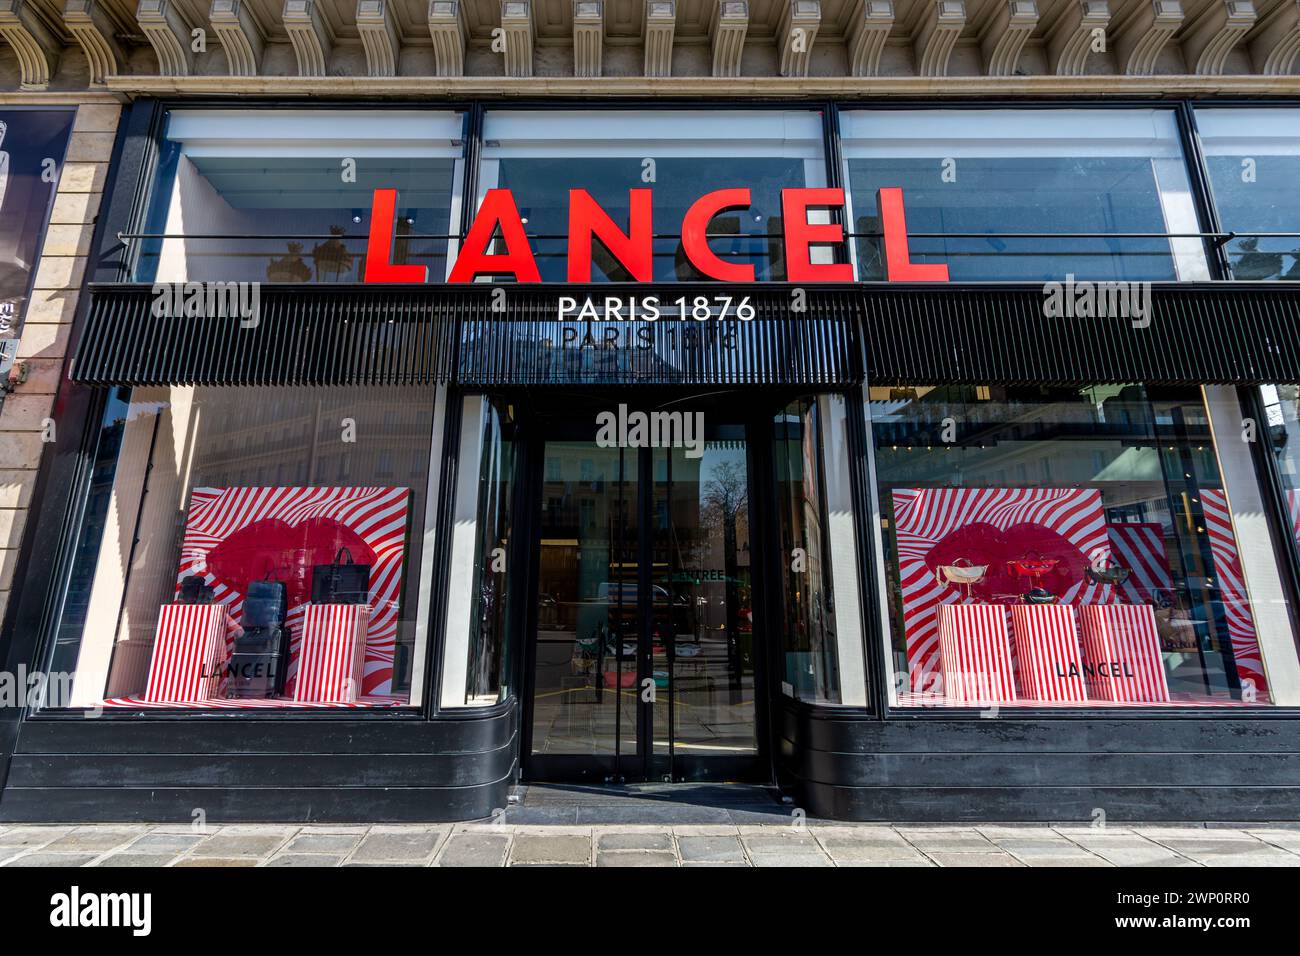 Exterior view of the main Lancel boutique located Place de l'Opéra in Paris. Lancel is a French leather goods company founded in Paris in 1876 Stock Photo